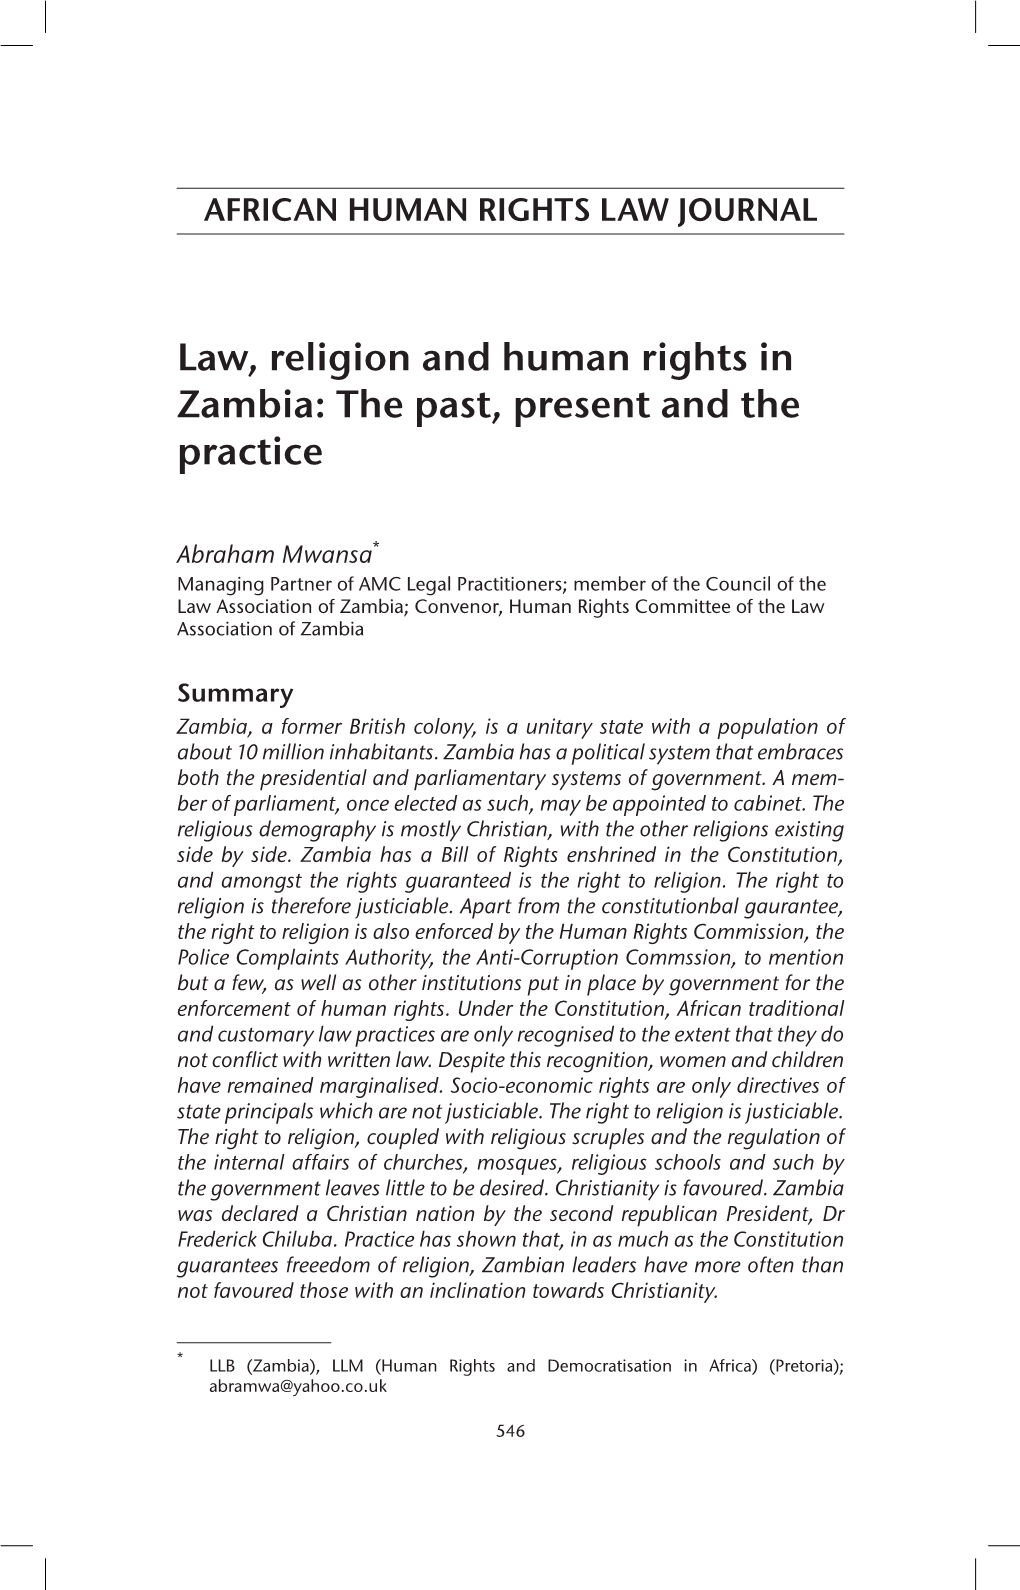 Law, Religion and Human Rights in Zambia: the Past, Present and the Practice